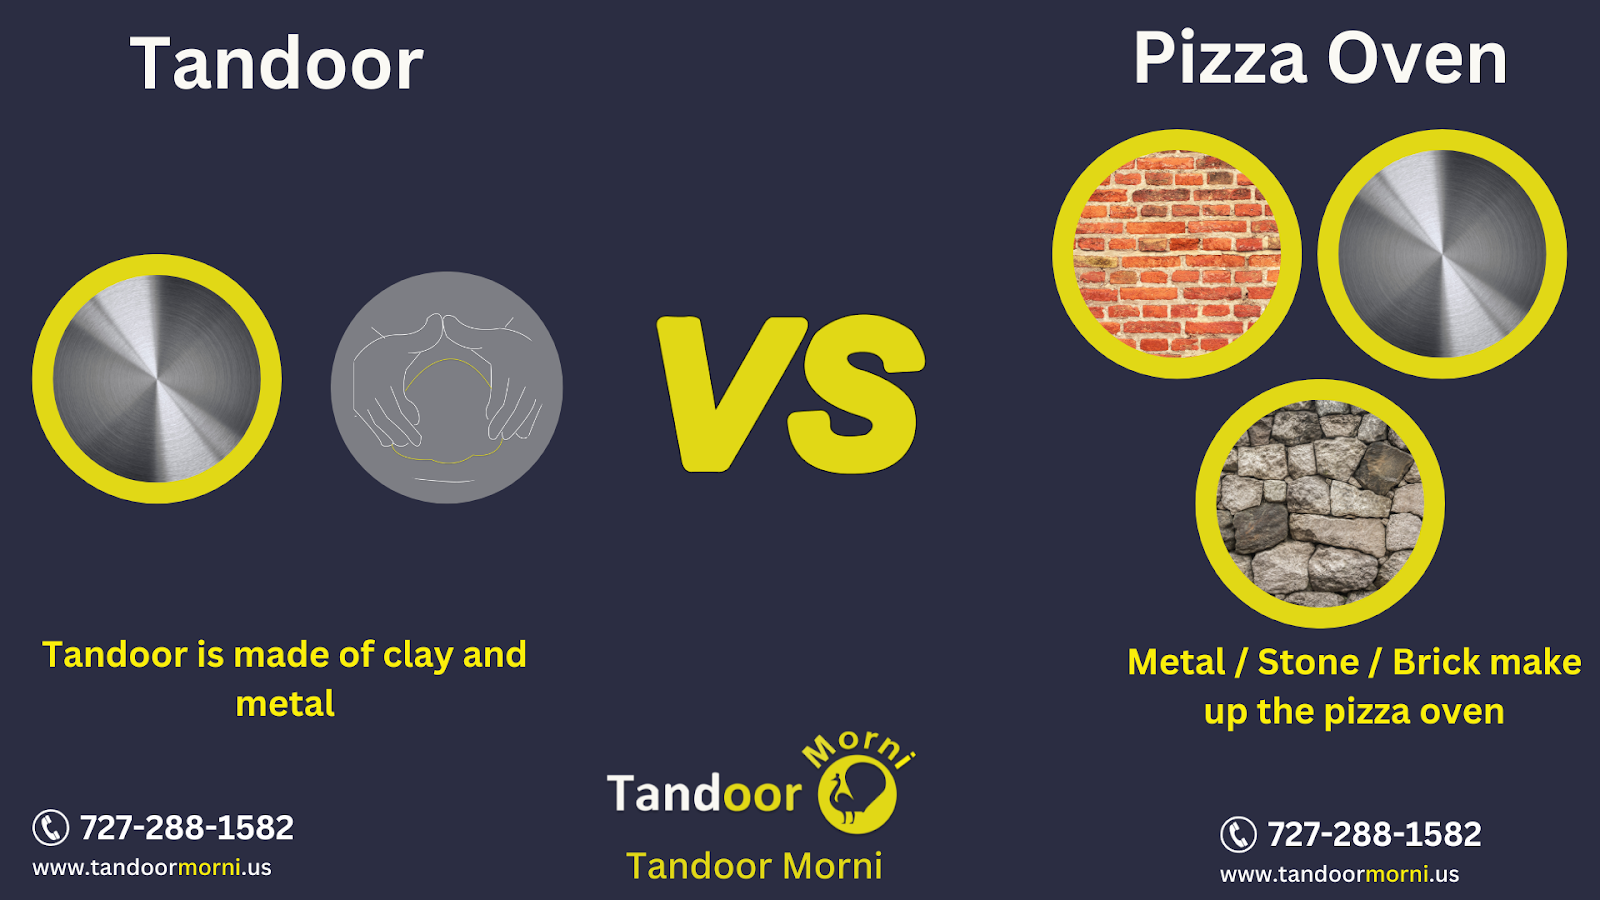 In contrast to the pizza oven, which is built of brick, metal, and stone, the tandoor is made of real clay and stainless steel. There is another distinction between a pizza oven vs a tandoor oven.